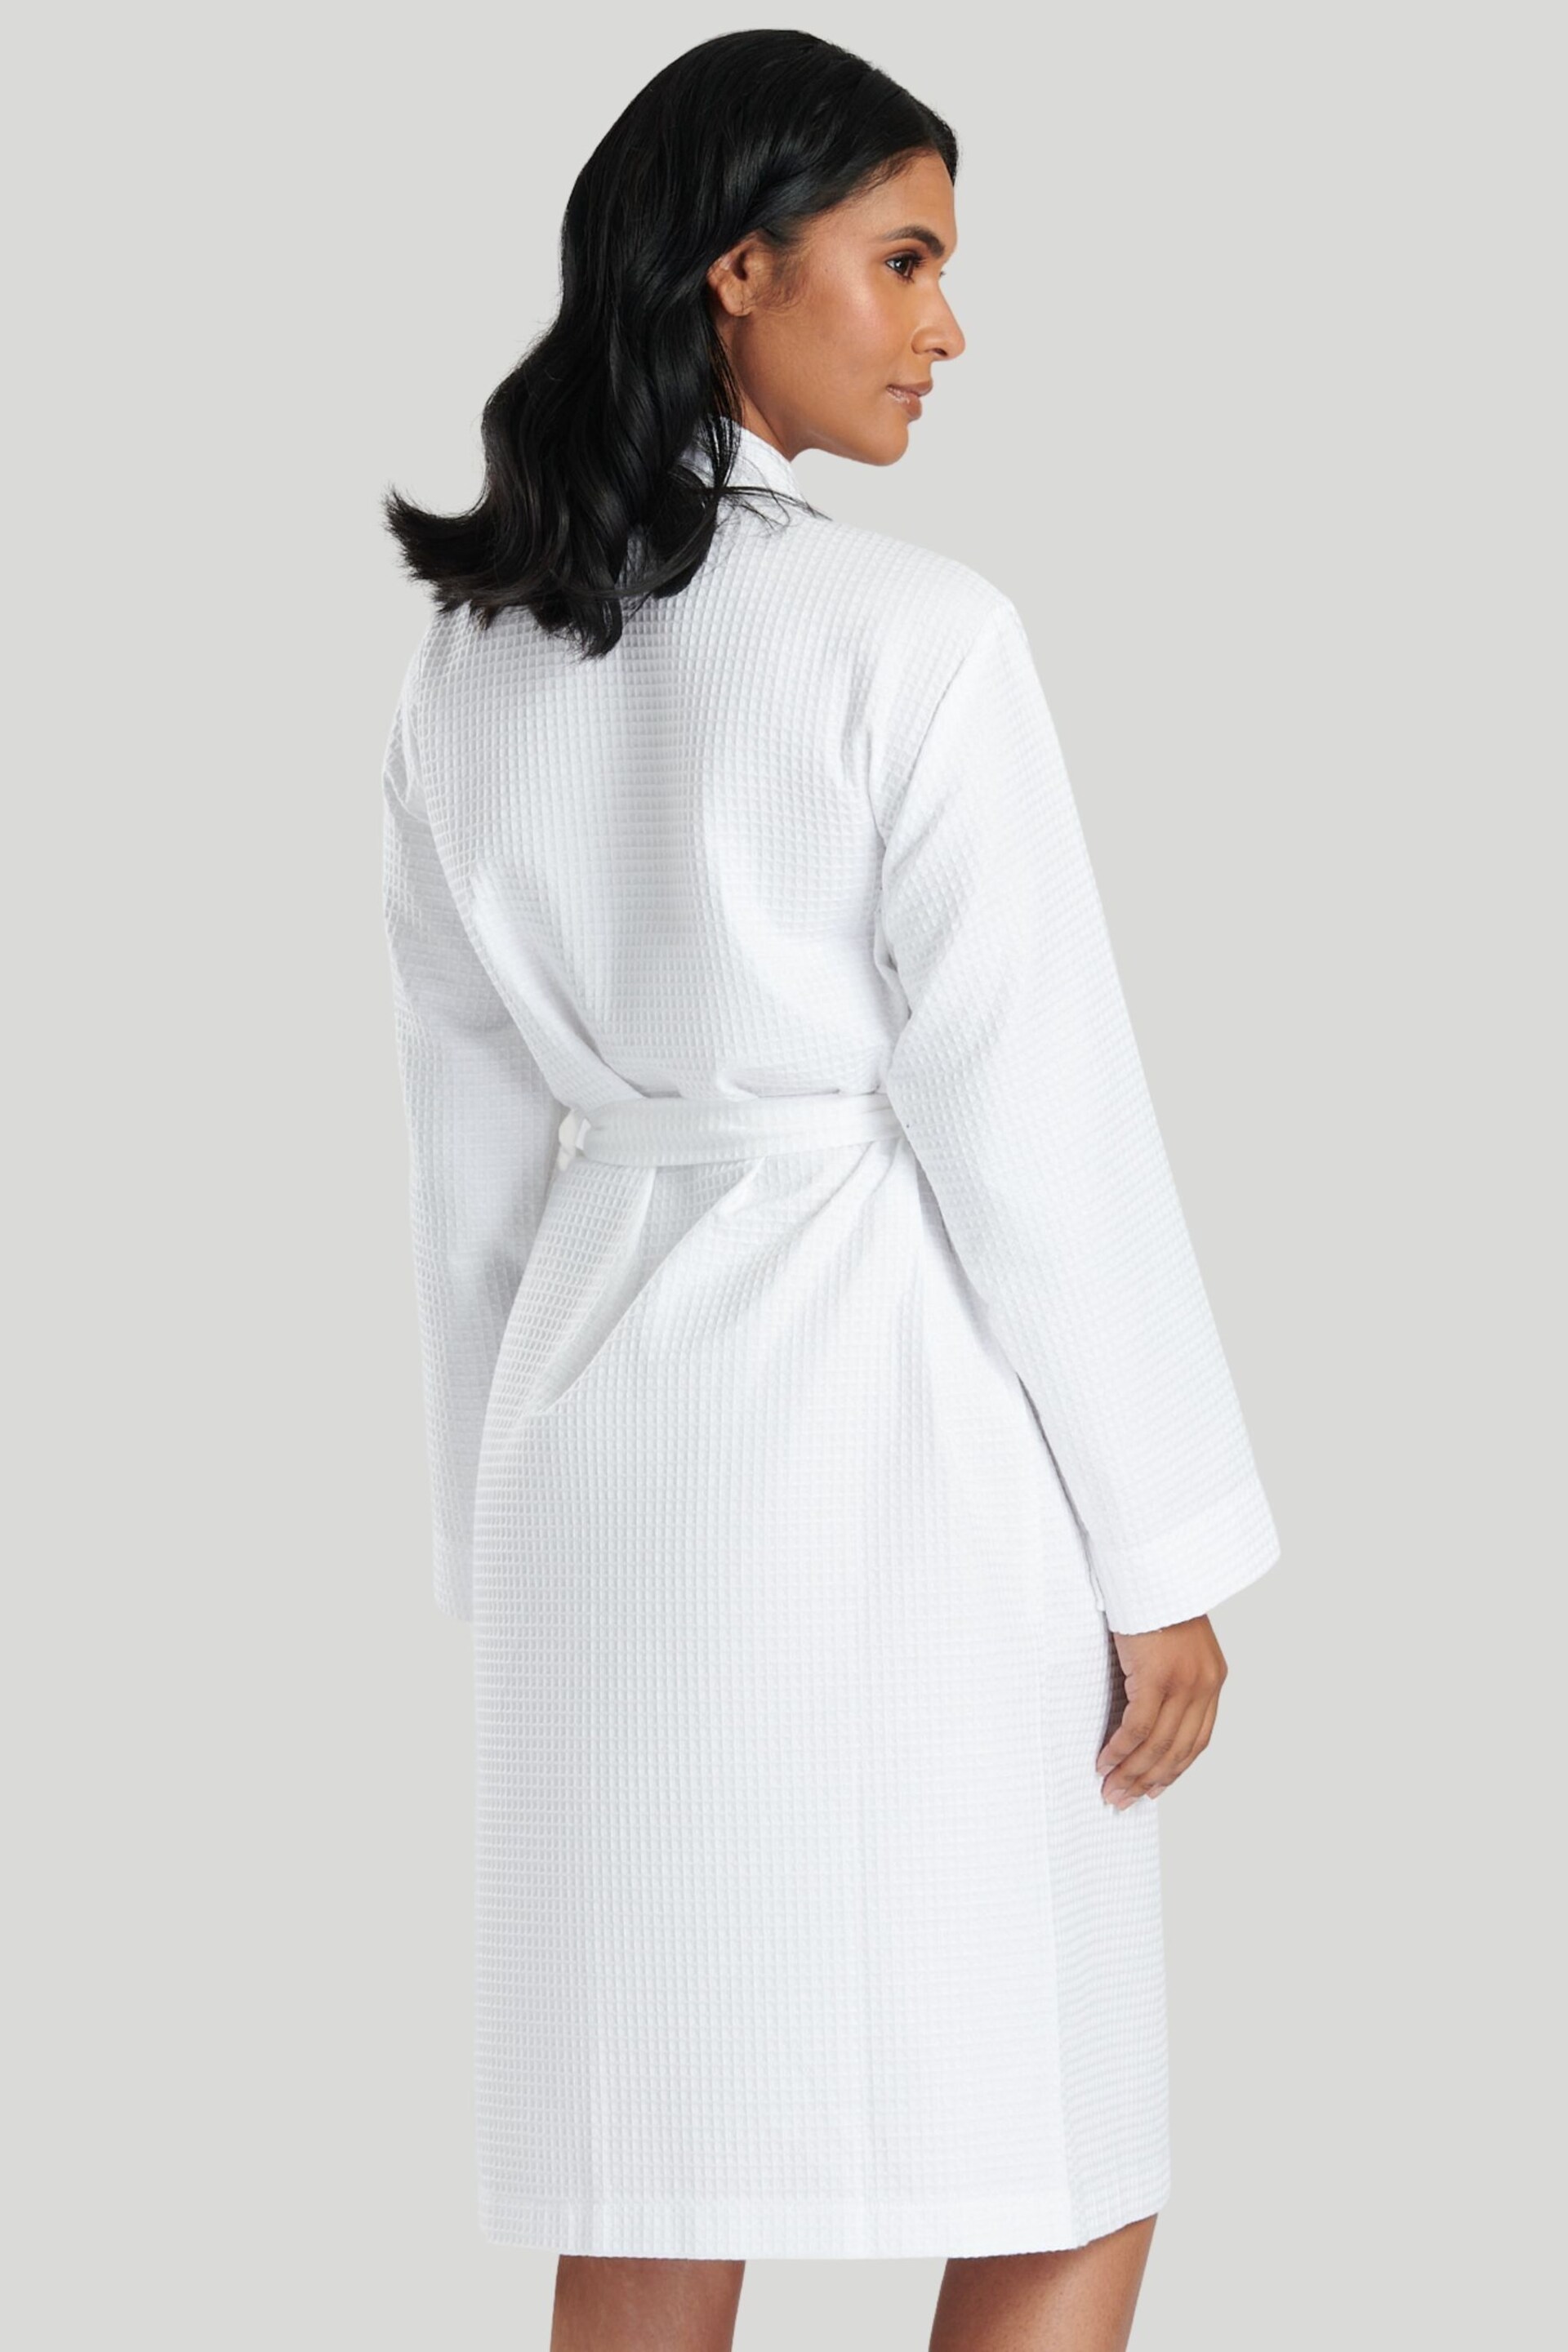 Loungeable White Cotton Waffle Robe - Image 6 of 7